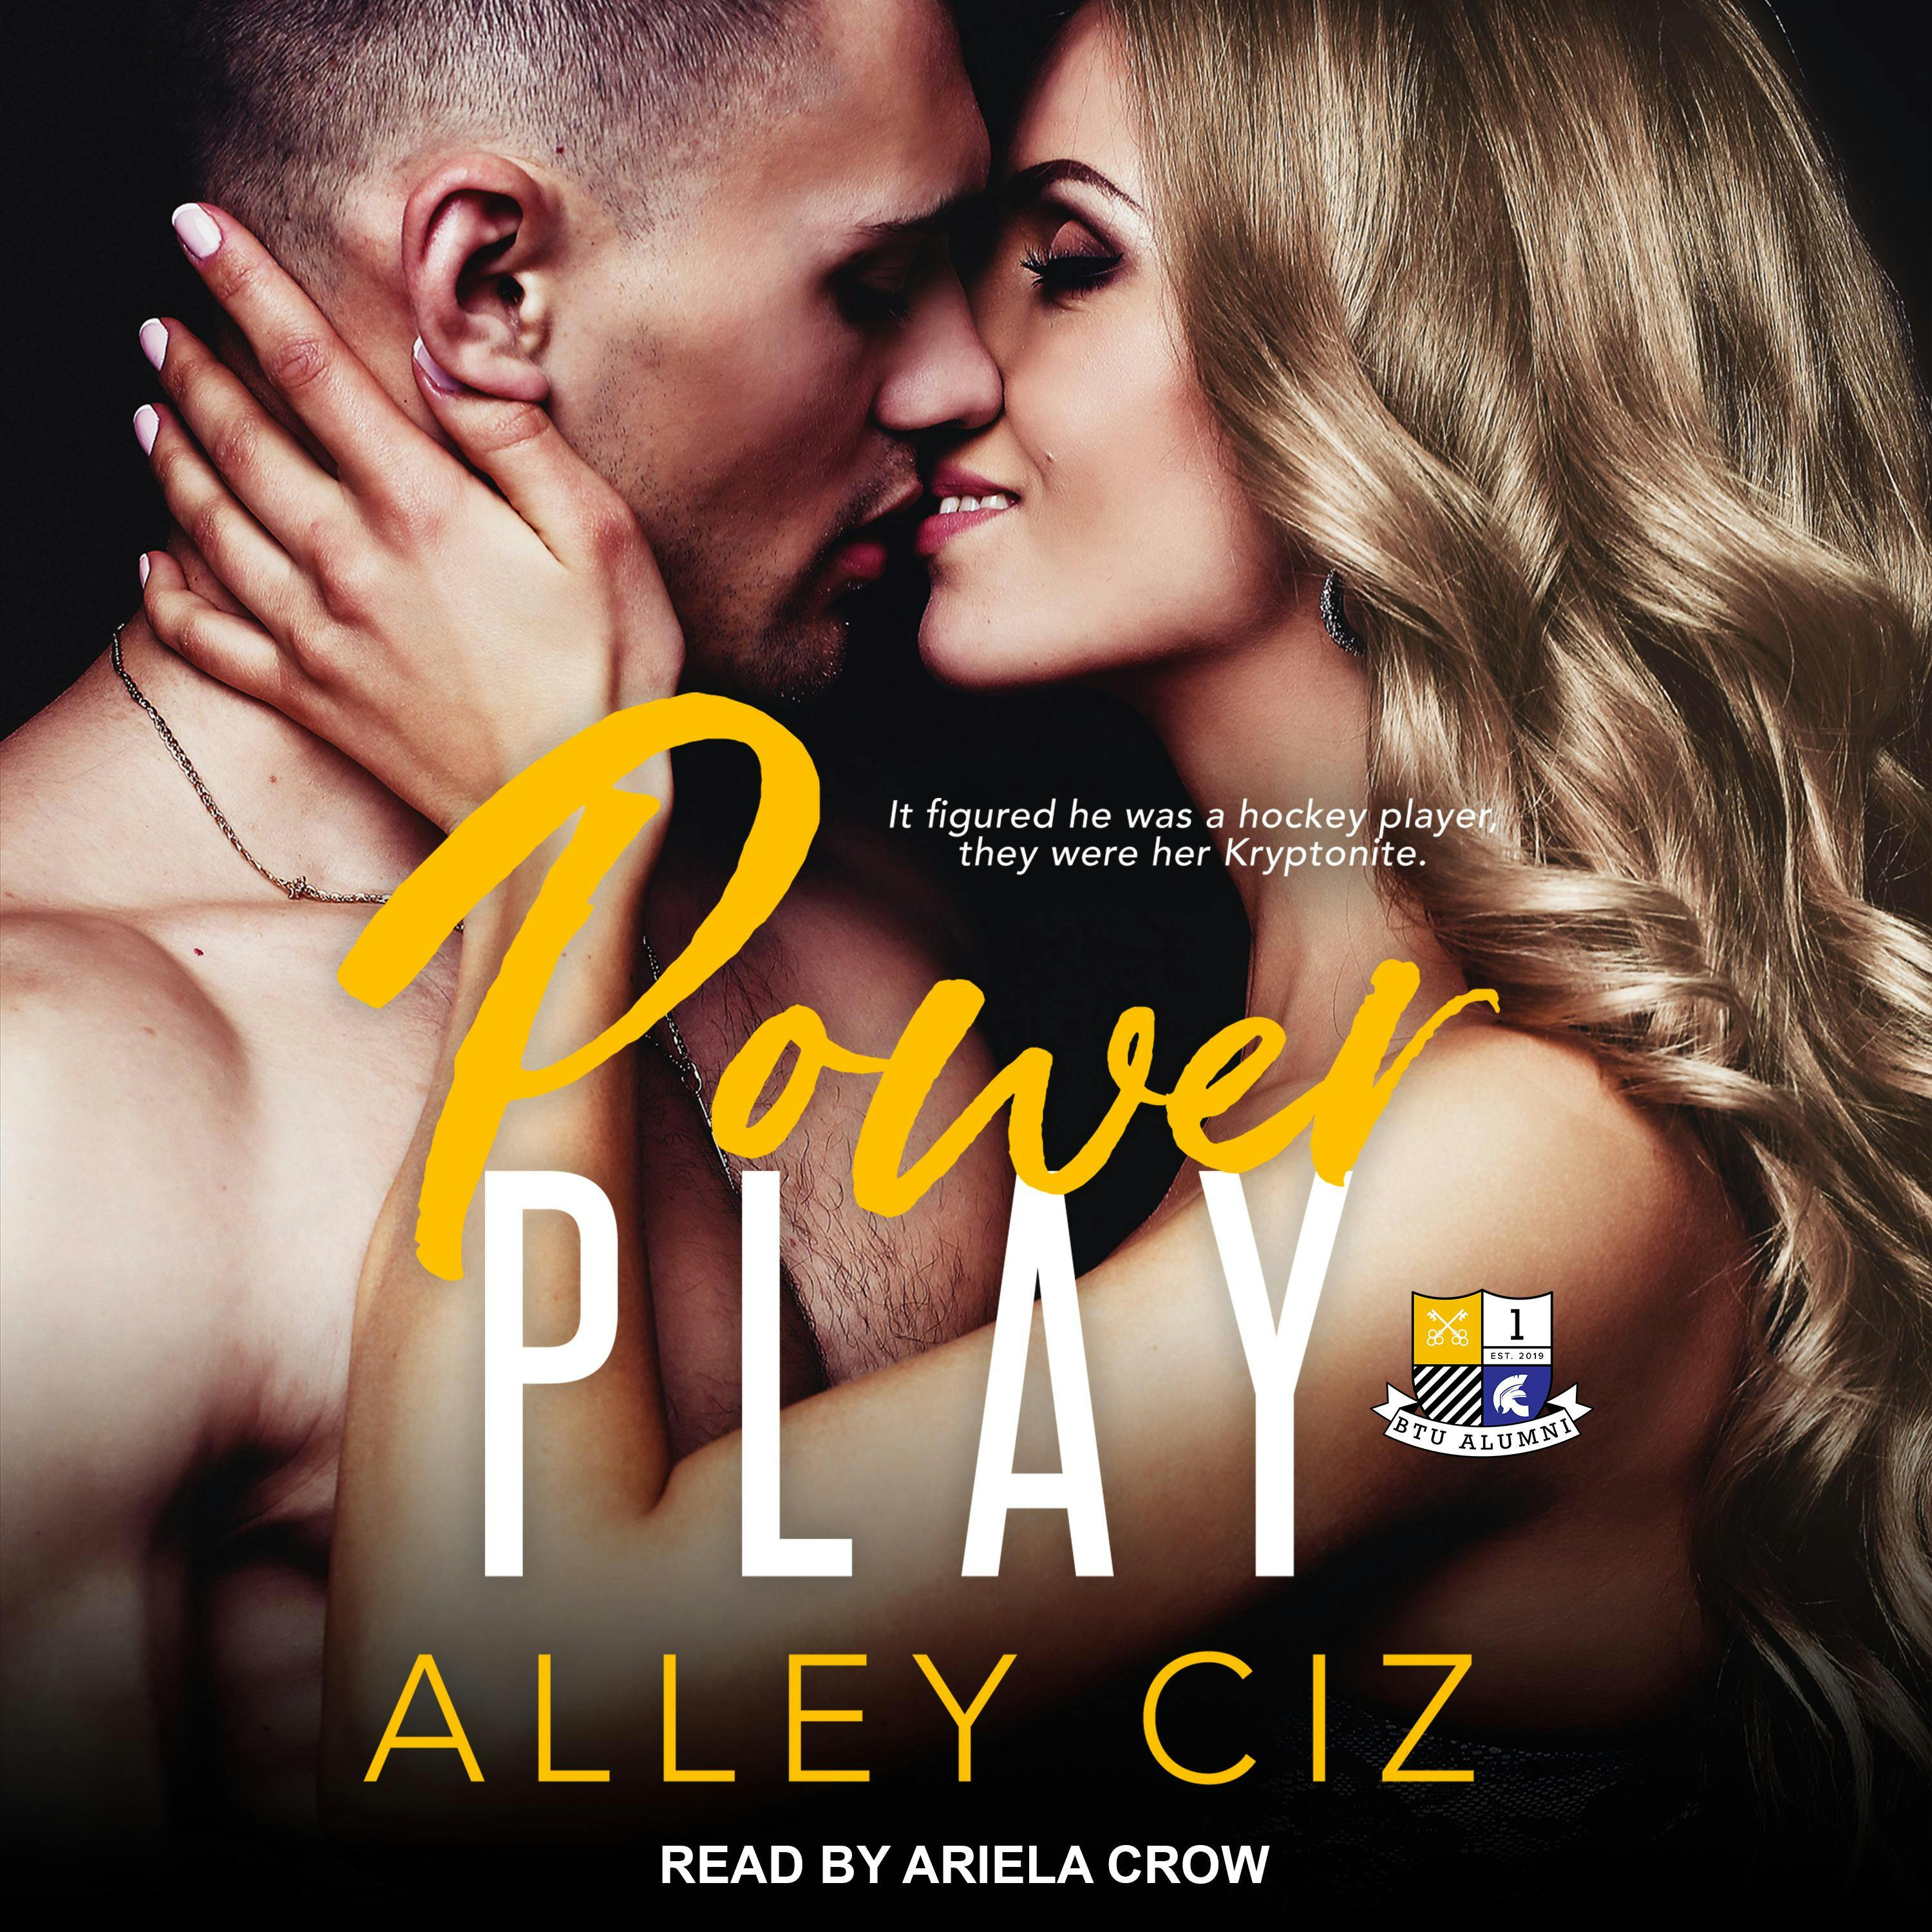 Power Play: It figured he was a hockey player, they were her Kryptonite. - Alley Ciz